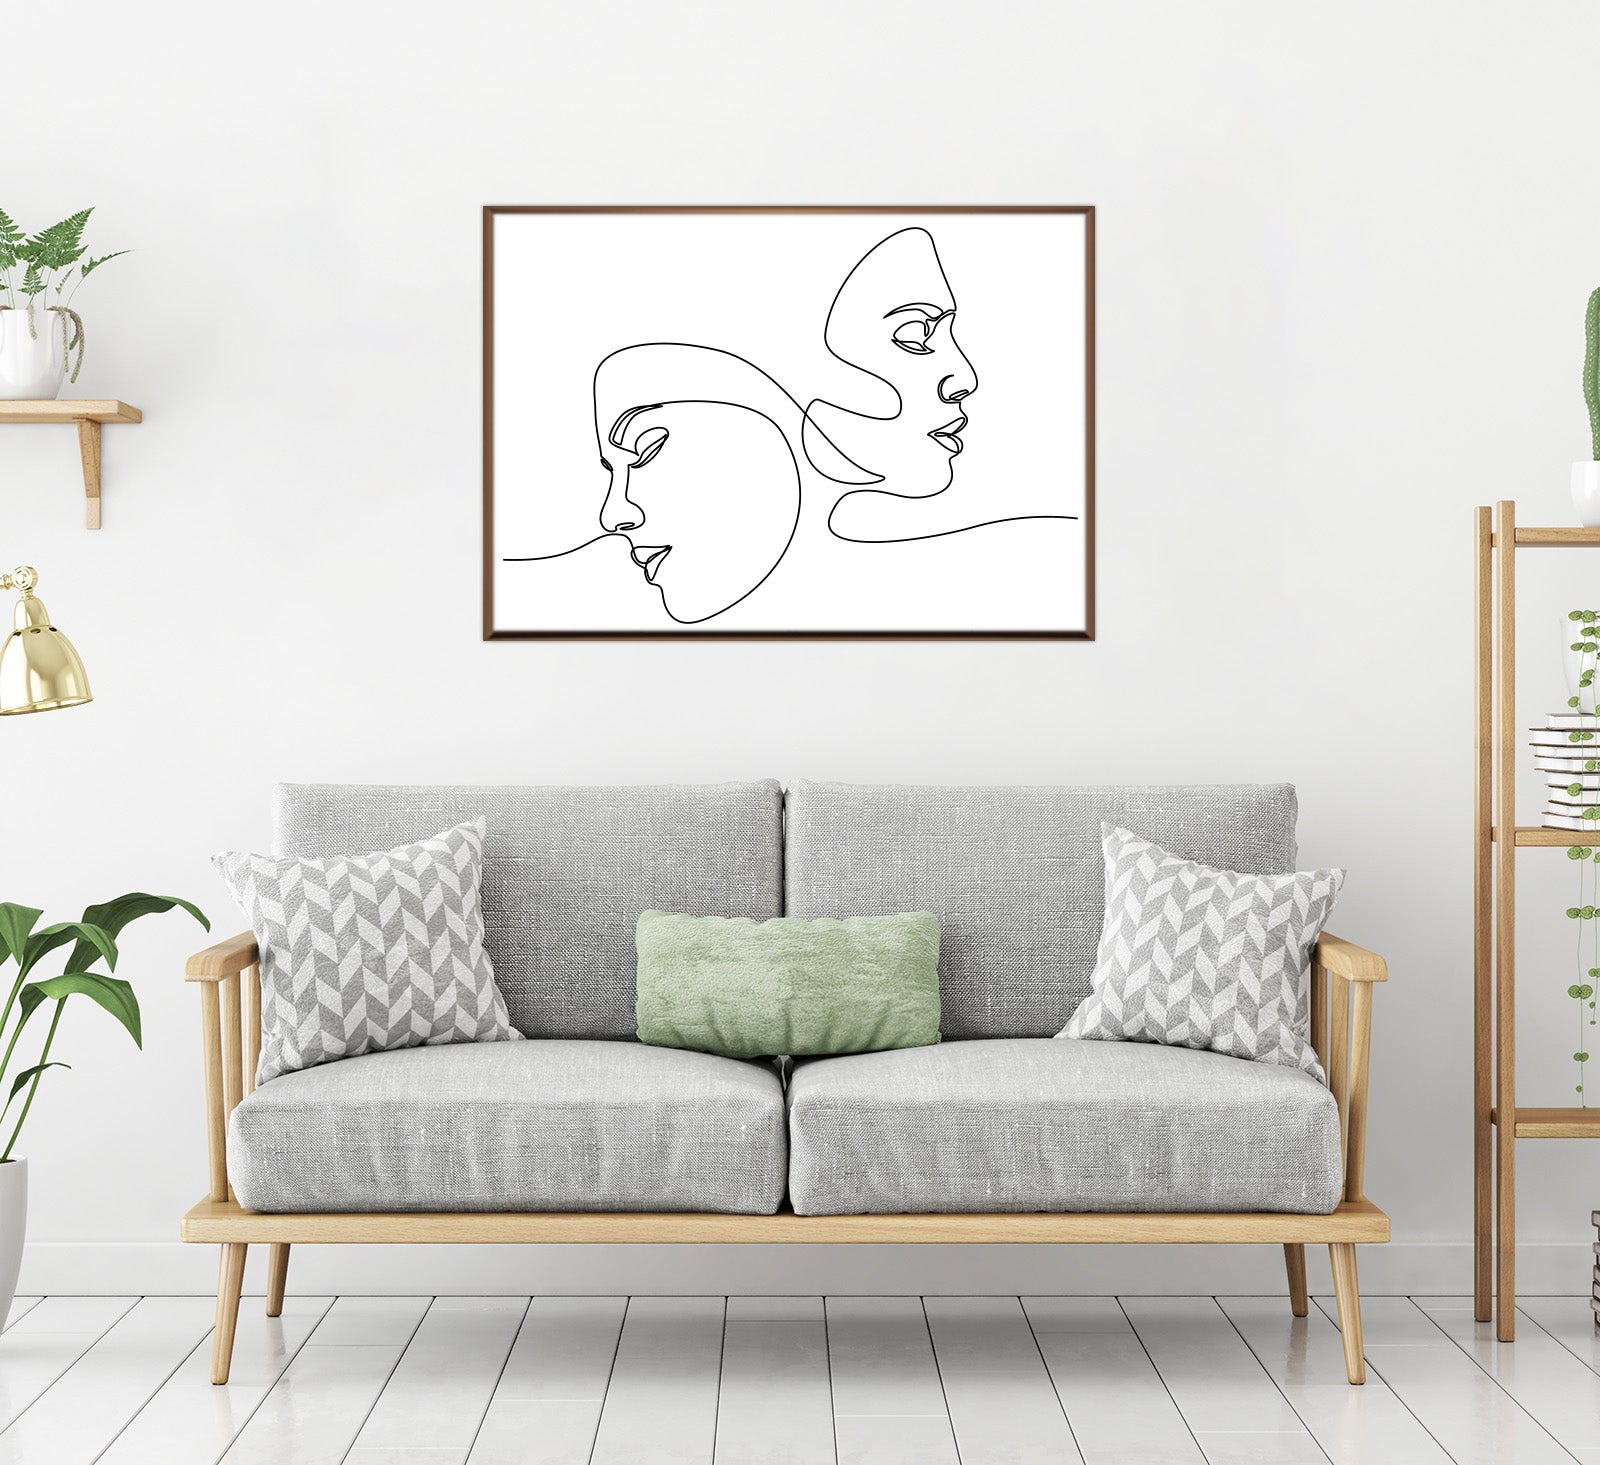 "Line Art Canvas Wall Painting (Two Opposite Faces) "